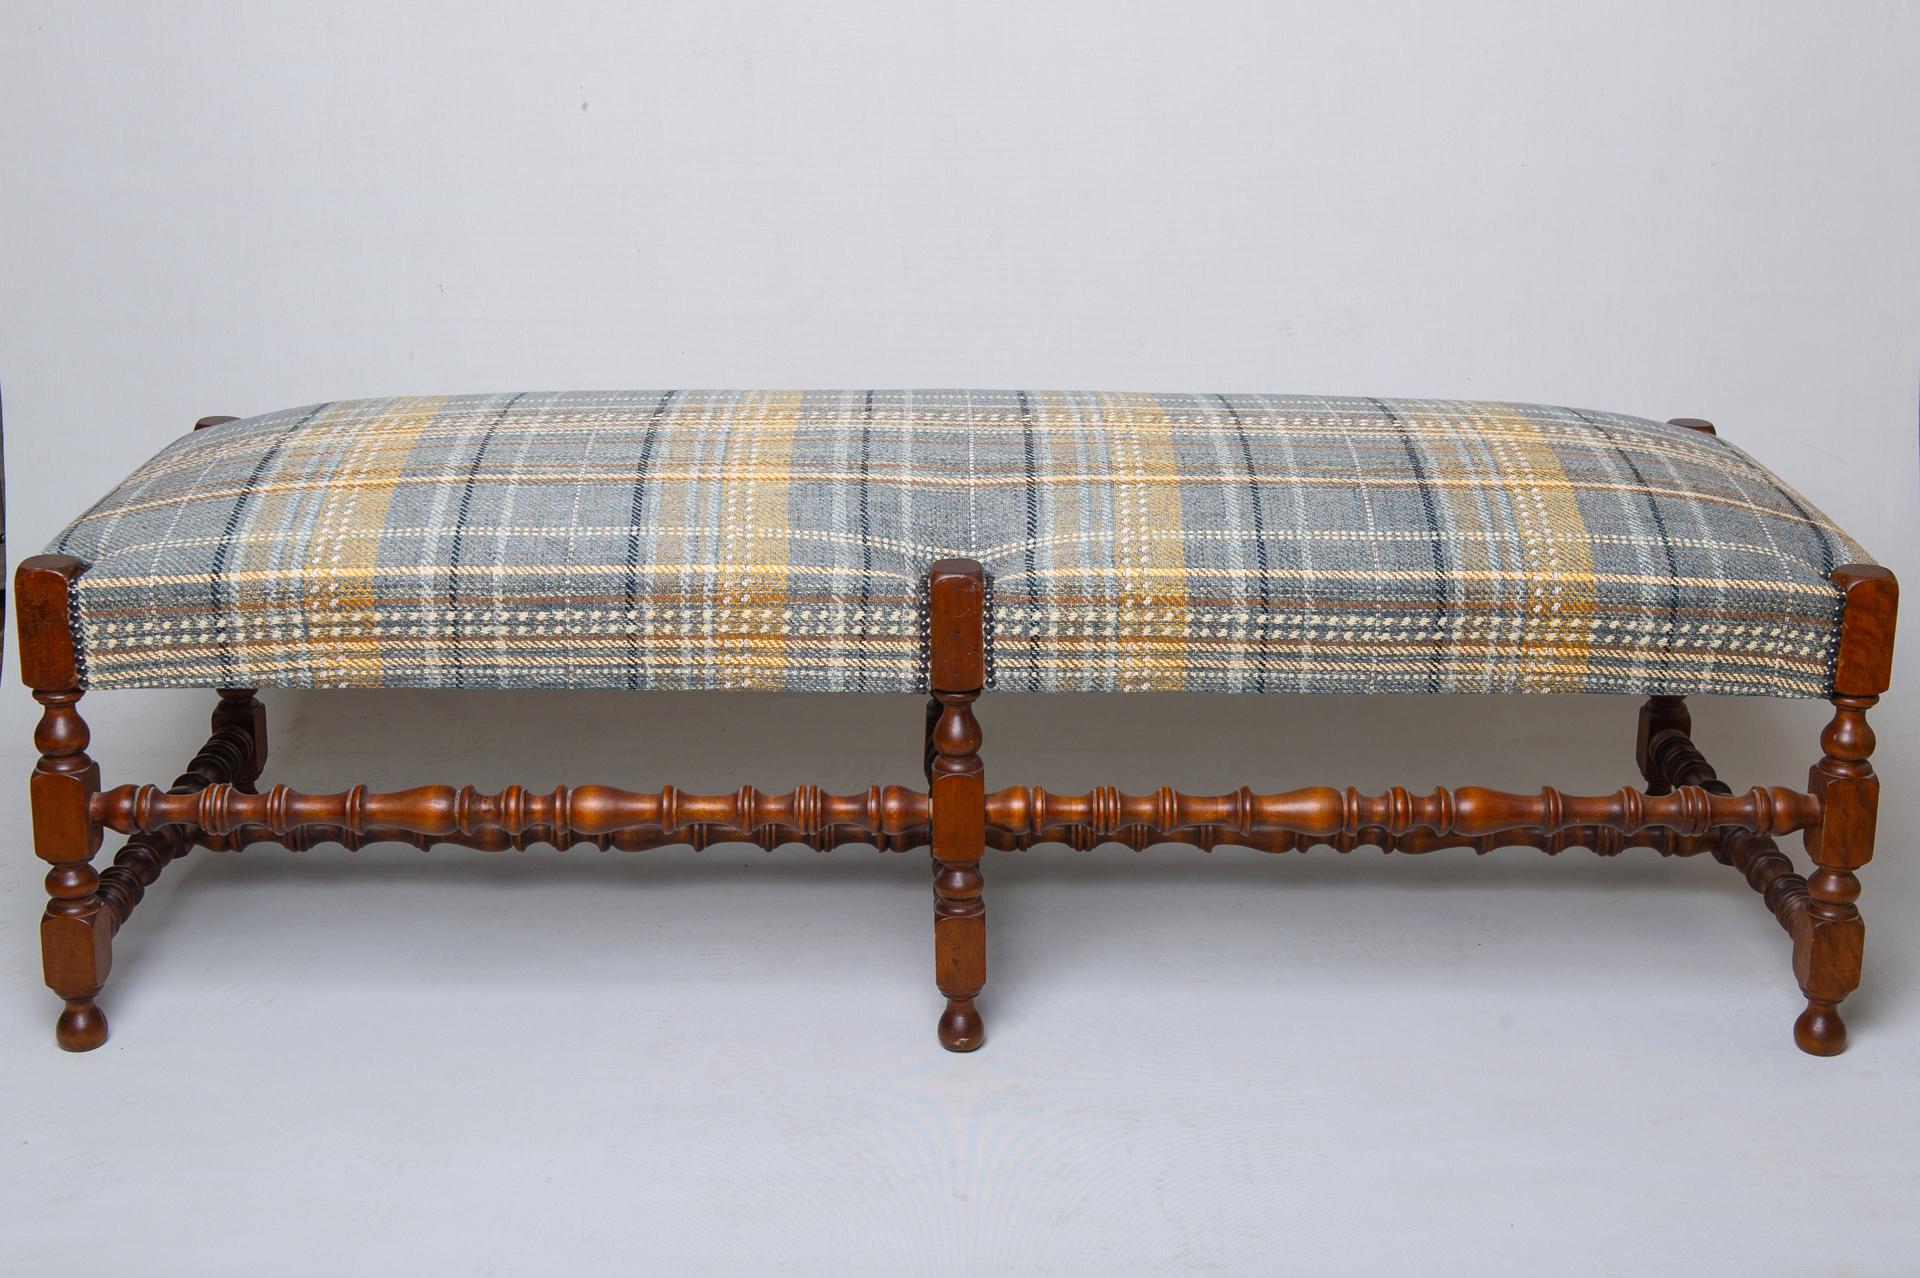 Baroque Revival Italian Padded Old Bench For Sale